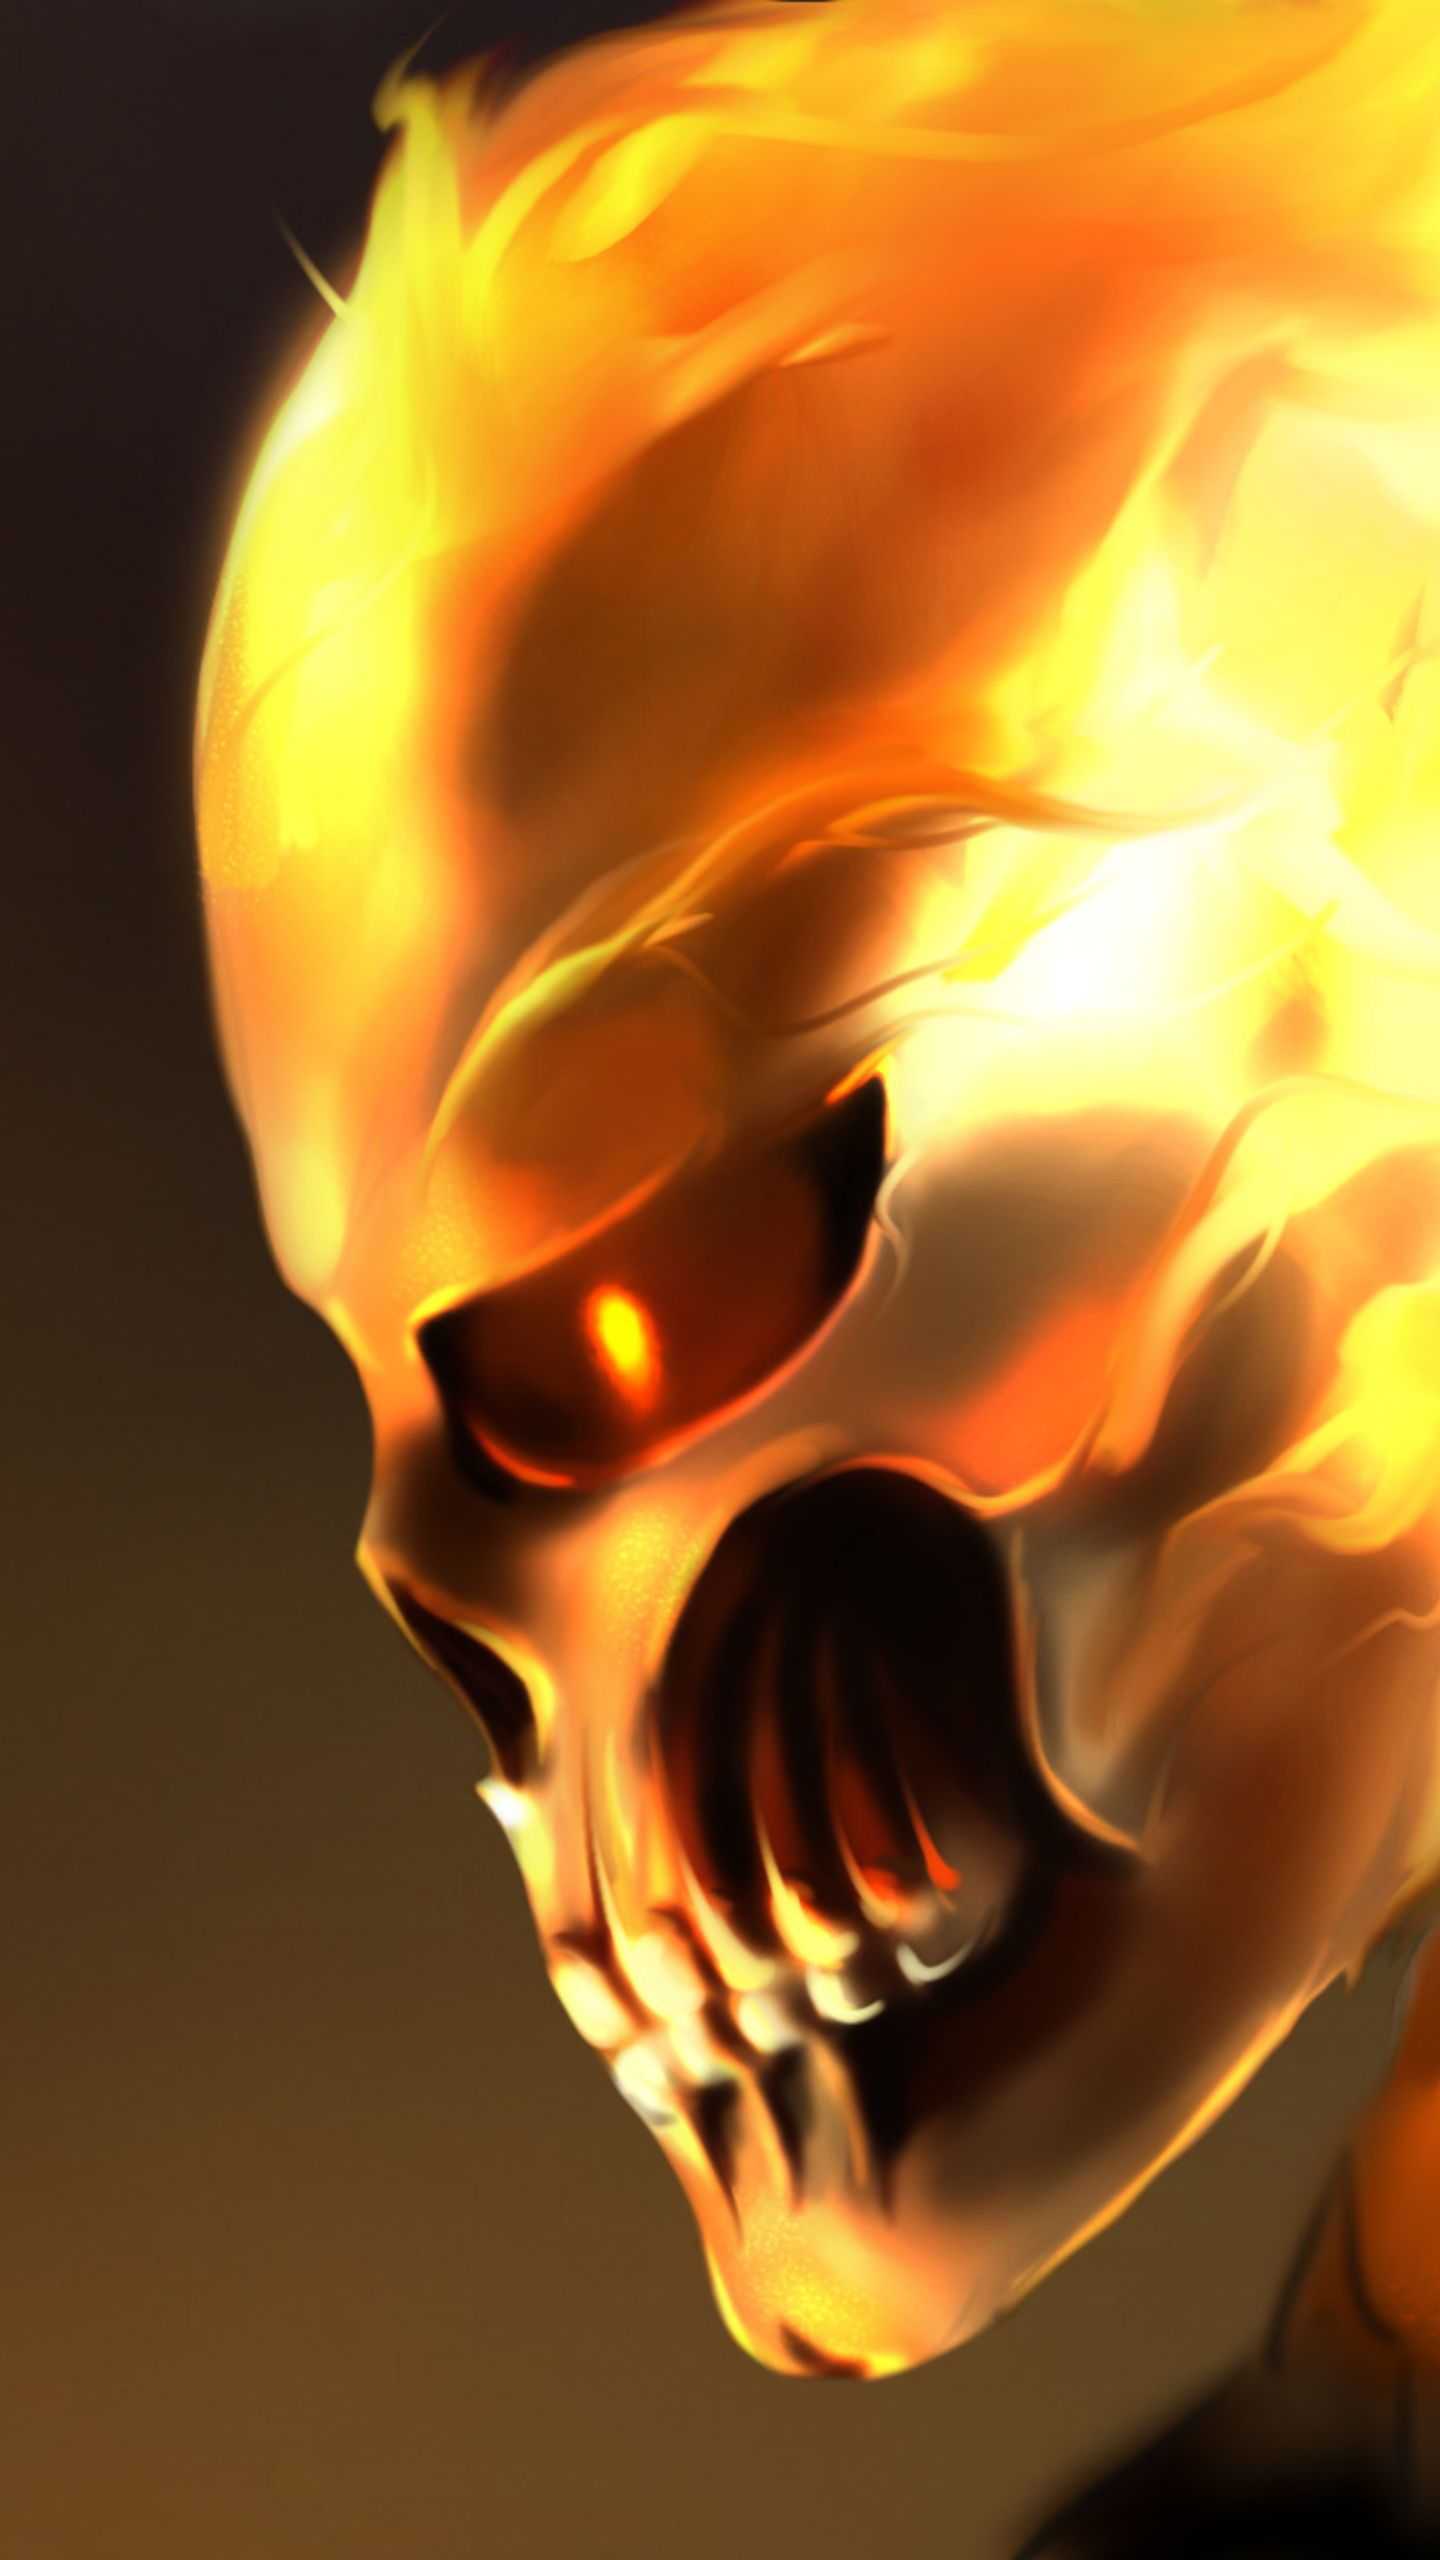 pix Cool Ghost Rider Wallpapers hd ghost rider wallpaper whatspaper.